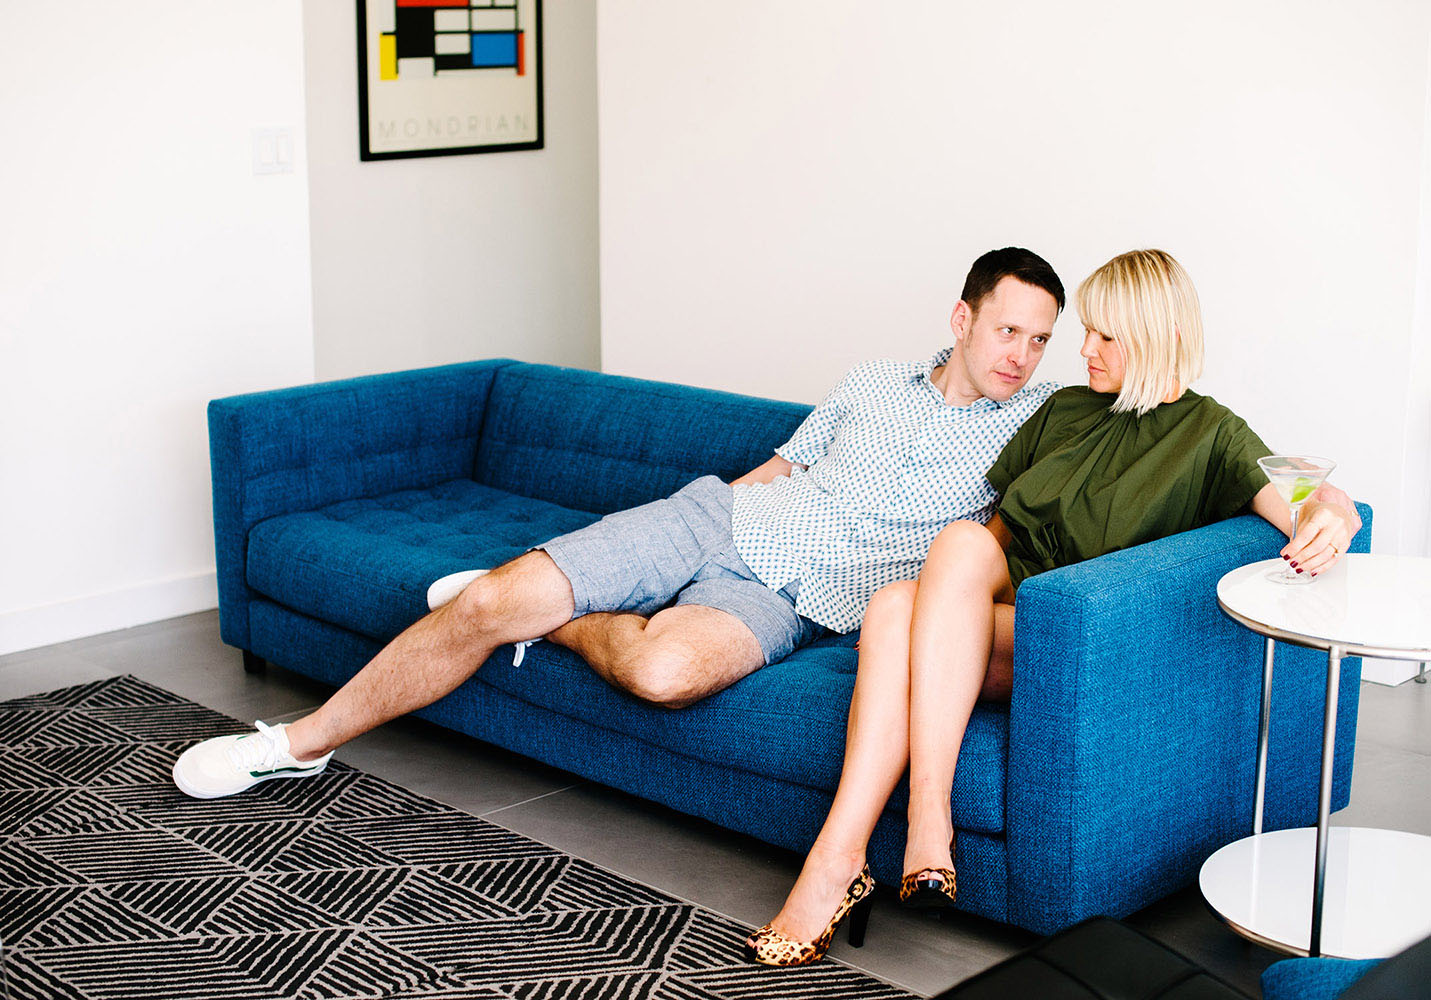 woman in green jumper with leopard print heels with martini on blue couch with guy in white shirt with blue dots and blue shorts and Mondrian print mid century modern furniture